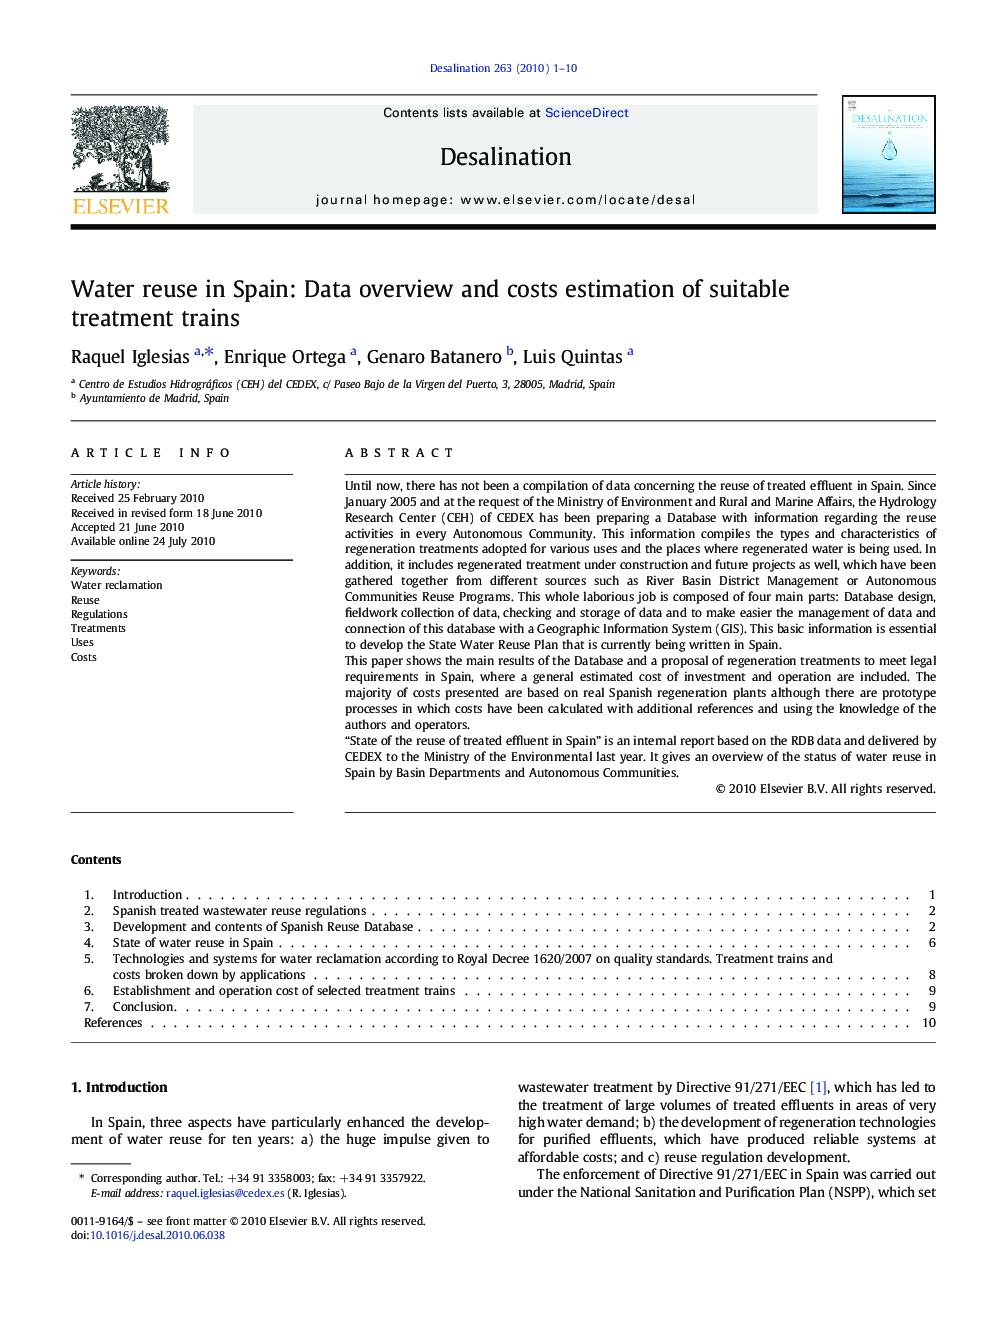 Water reuse in Spain: Data overview and costs estimation of suitable treatment trains